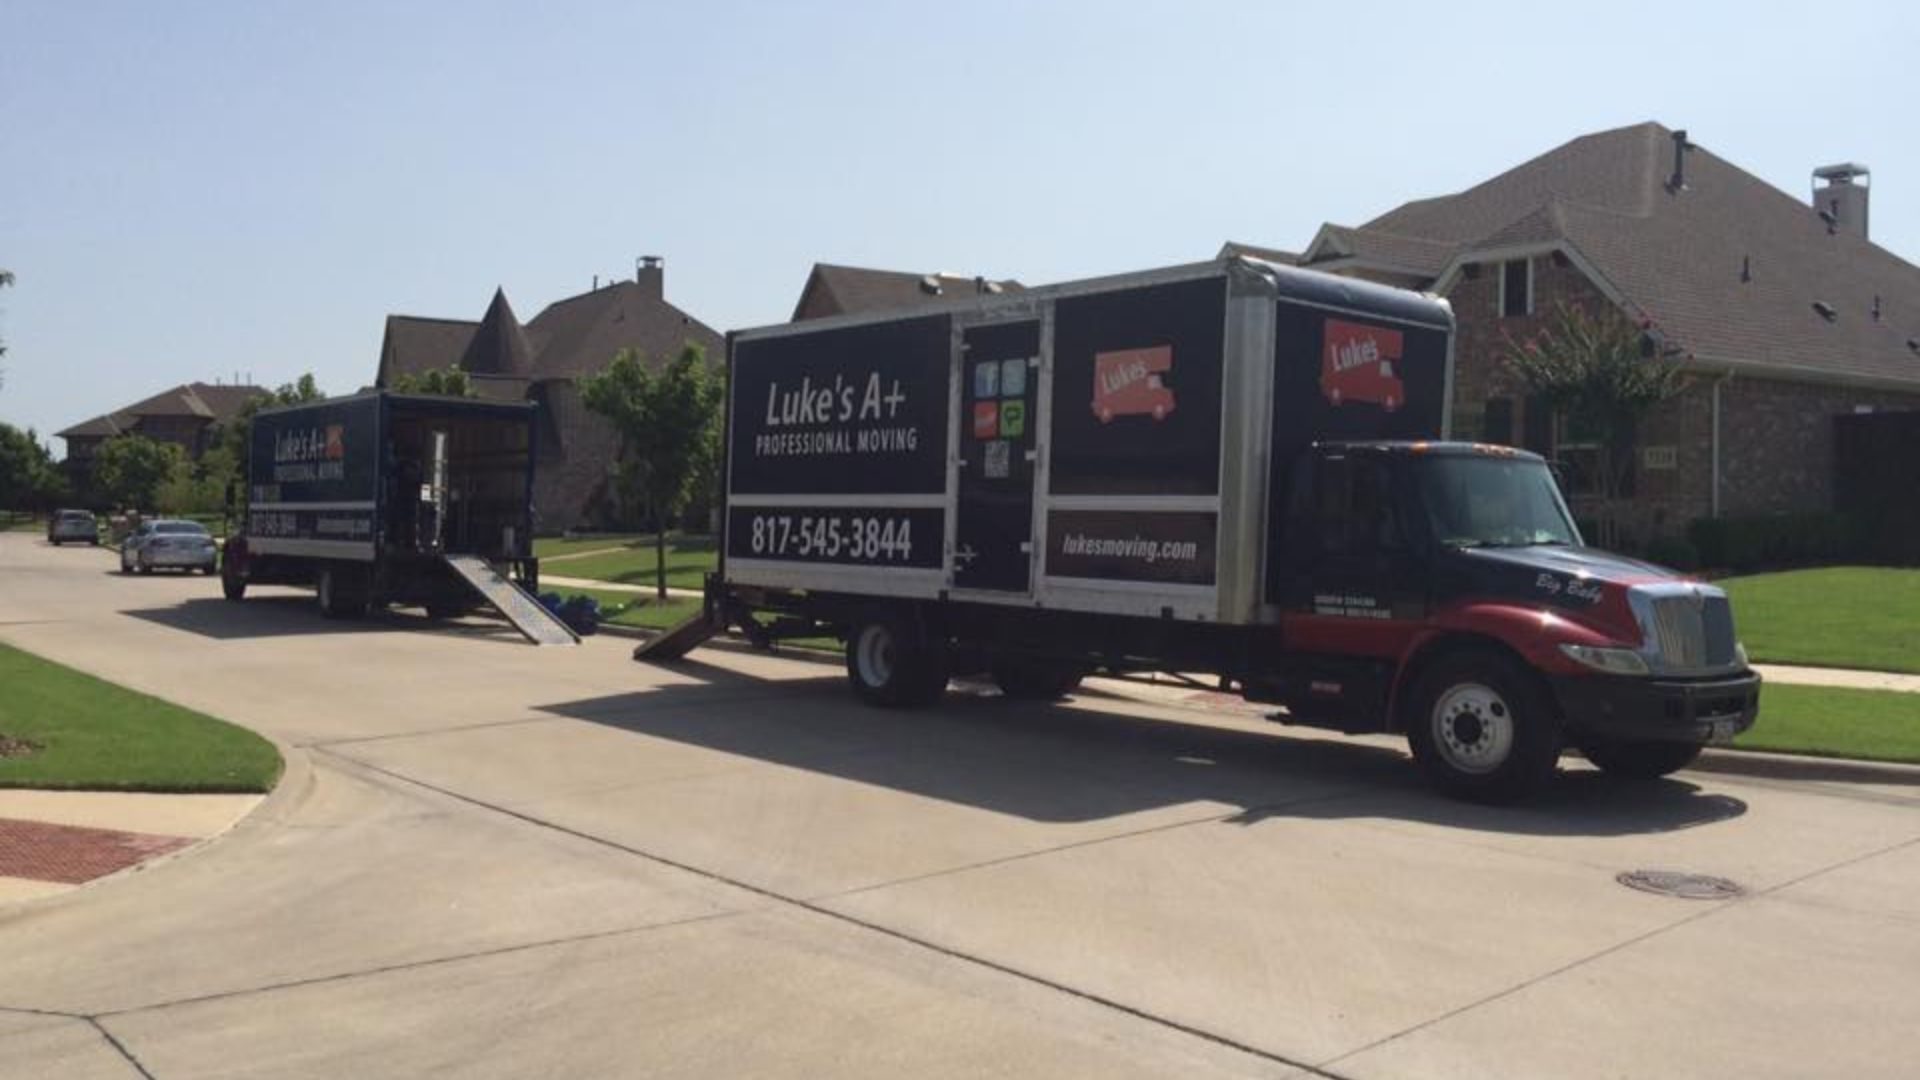 lukes professional moving truck